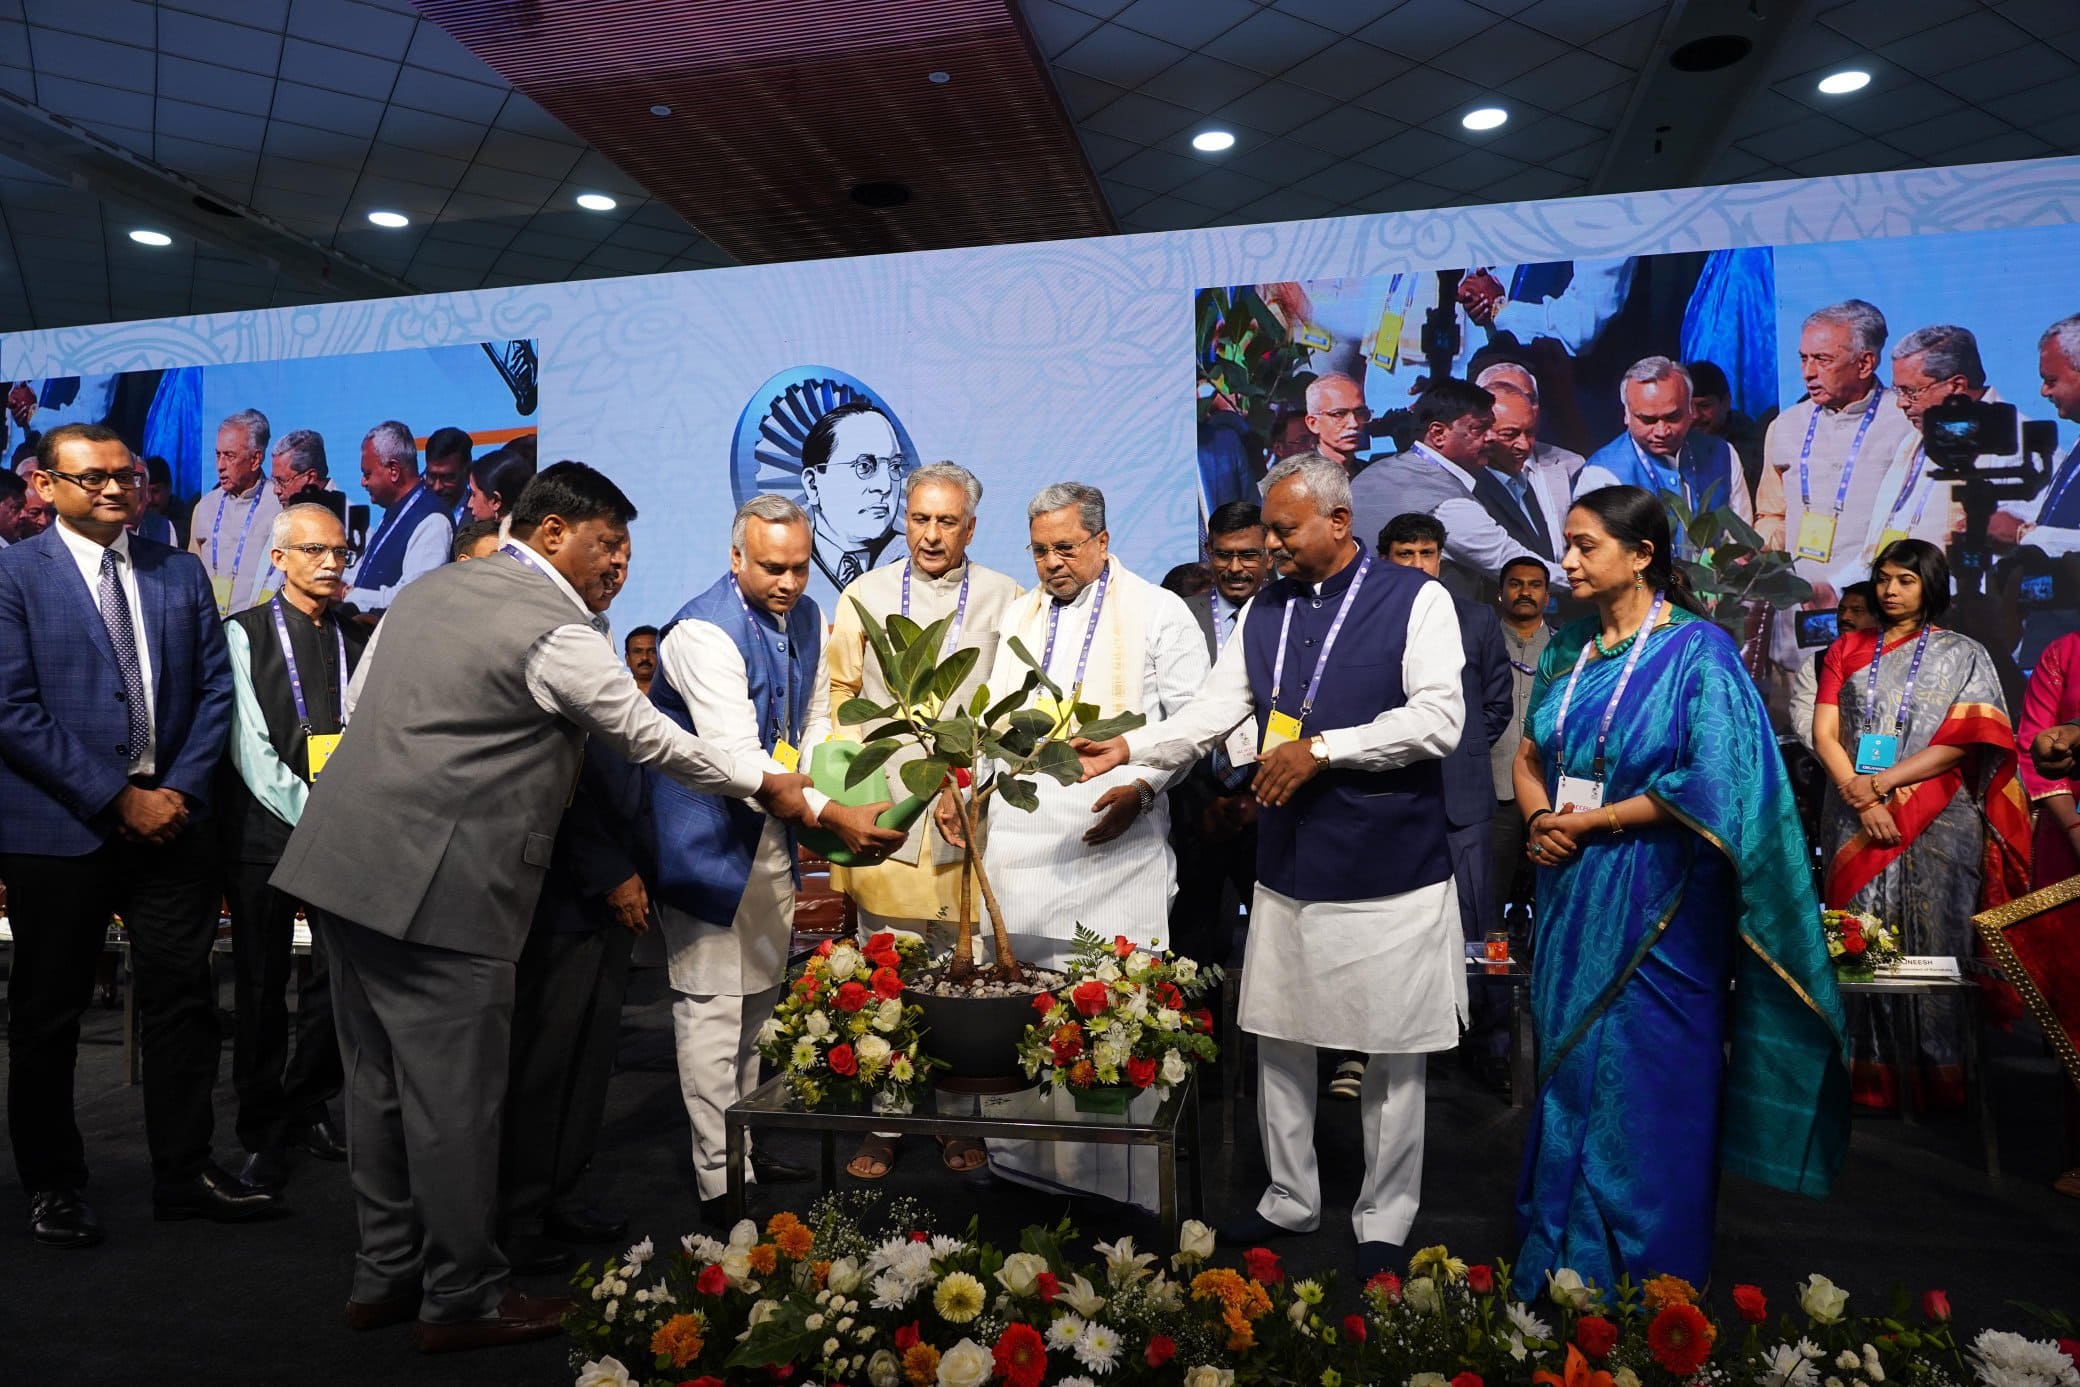 Karnataka Chief Minister Siddaramaiah inaugurating the Constitution and National Unity Conference at Palace Ground in Bengaluru on Saturday. (X)